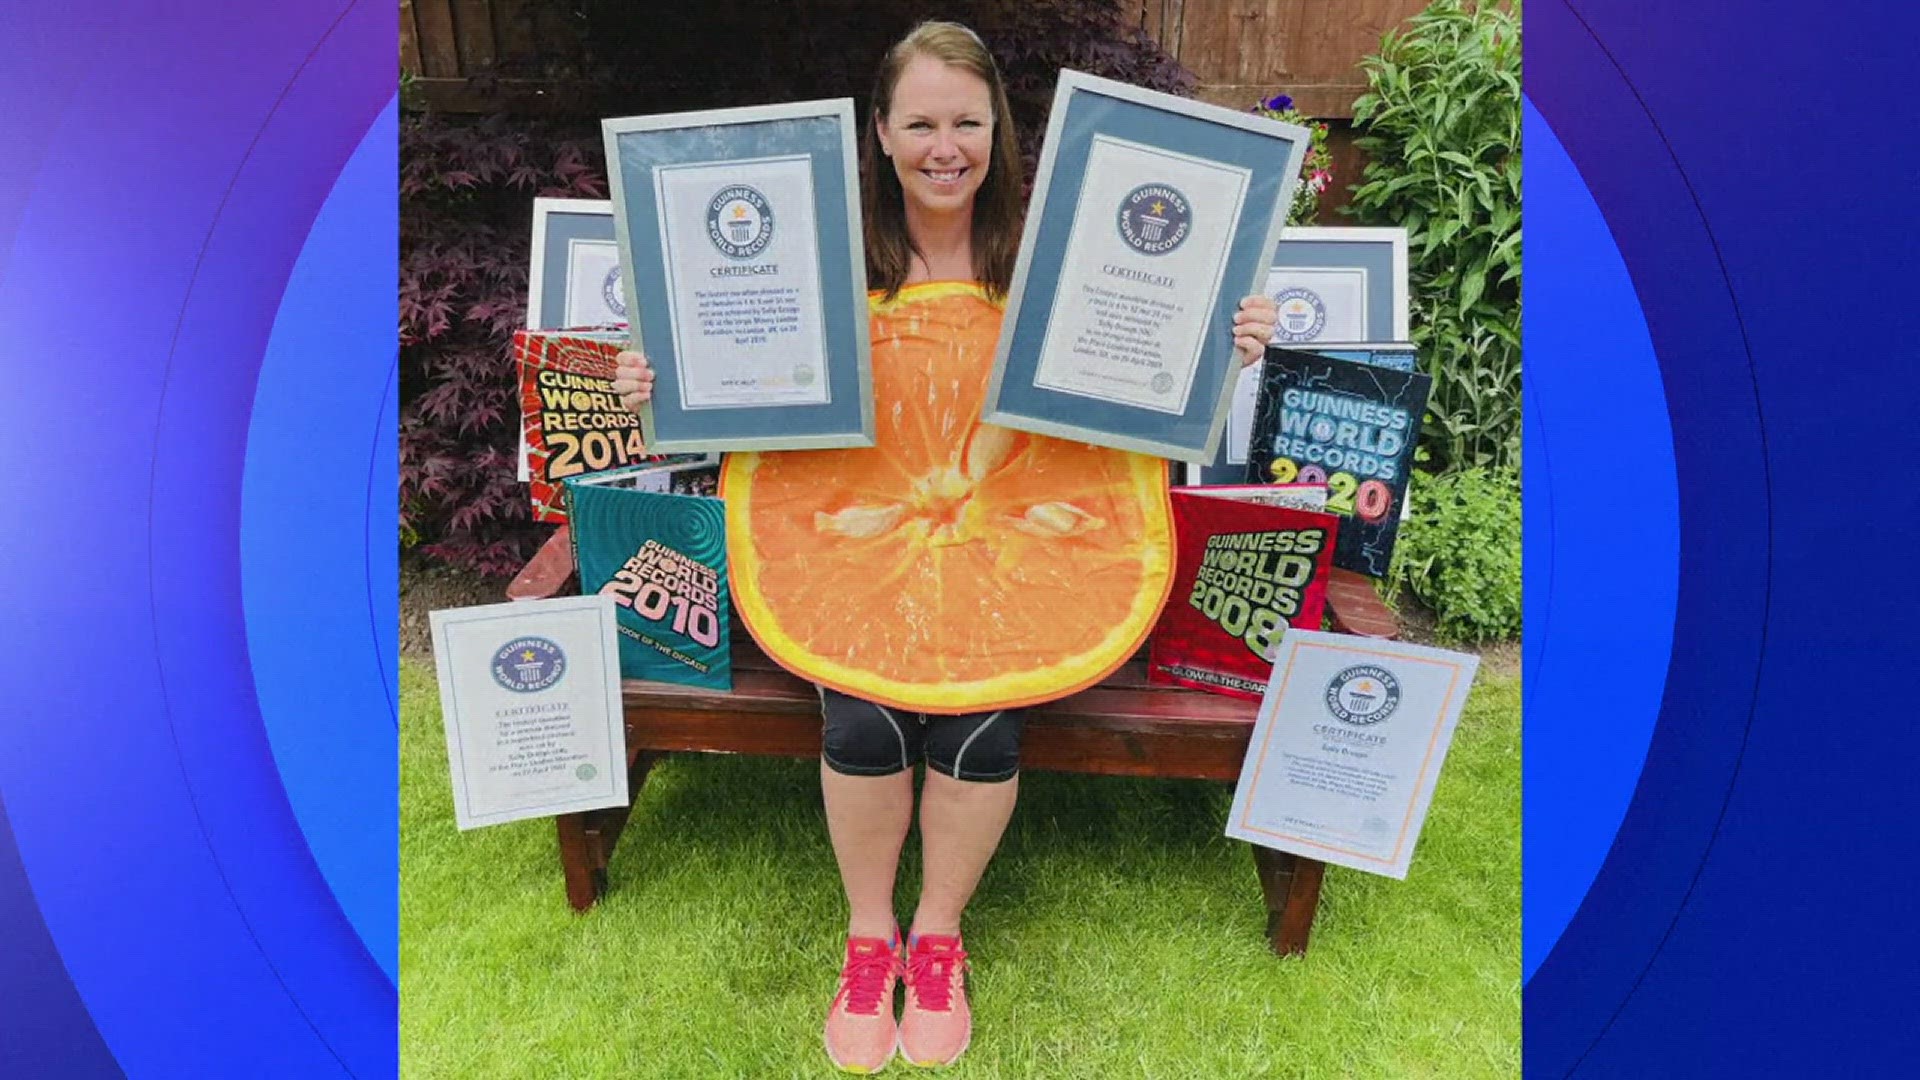 Sally Orange from England has made records throughout 80 marathons with her costume choices. Over time even running a marathon on every continent.